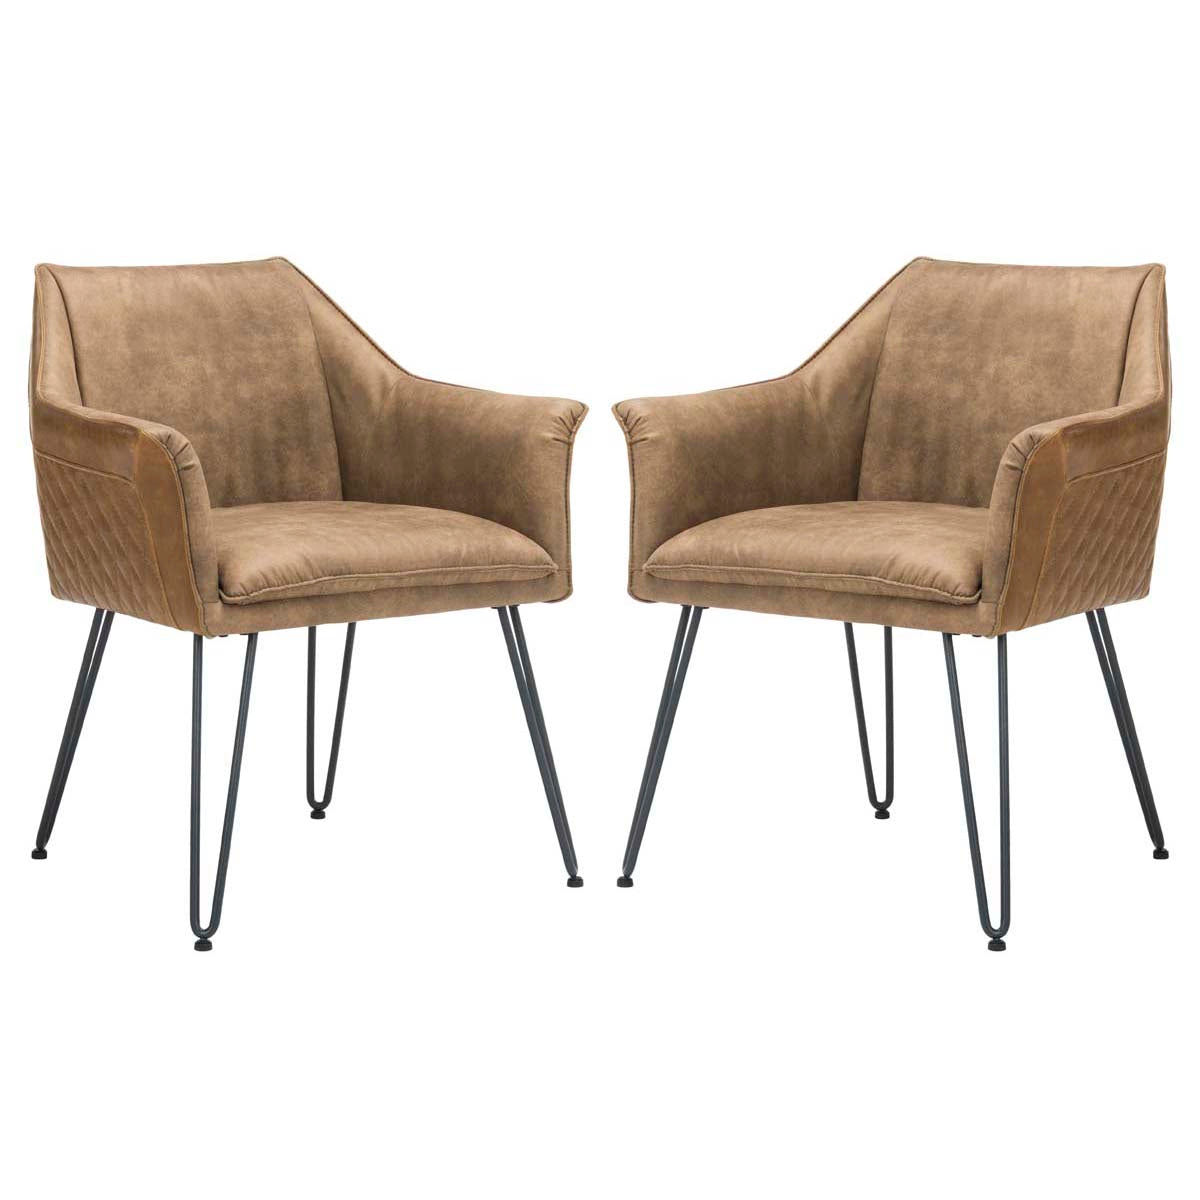 Safavieh Esme 19''H Mid Century Modern Leather Dining Chair, FOX1705 - Brown Leather/Suede (Set of 2)